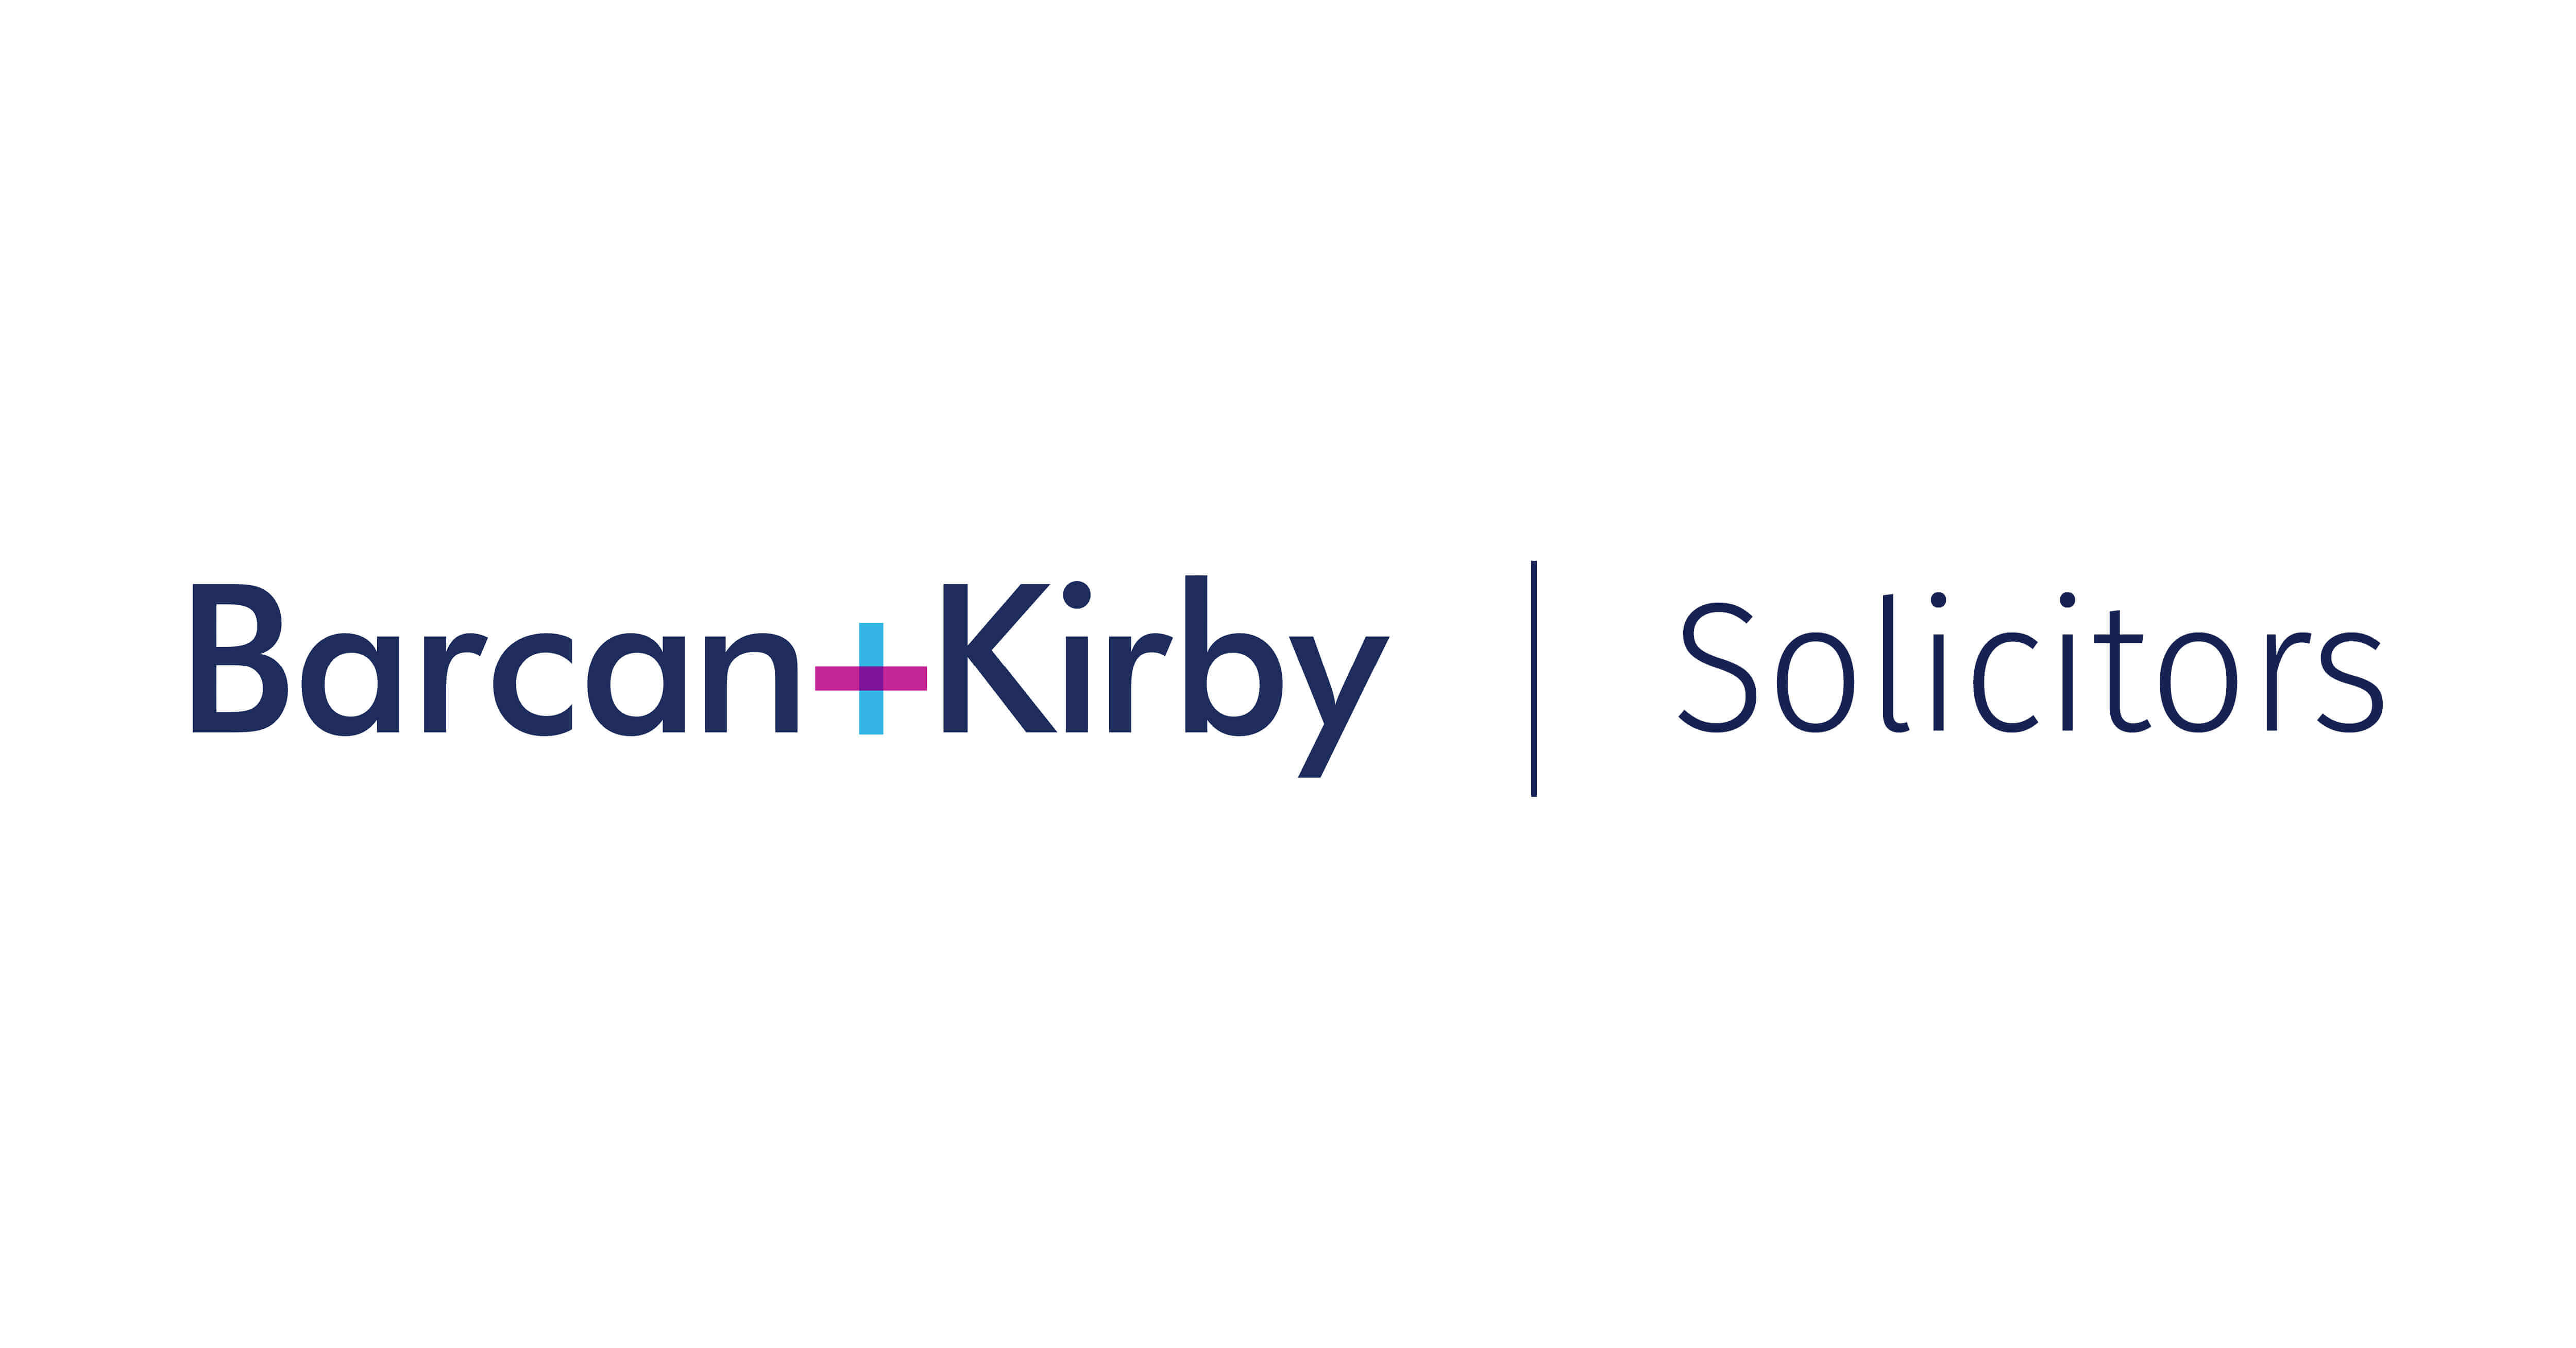 Barcan-kirby-solicitors-logo